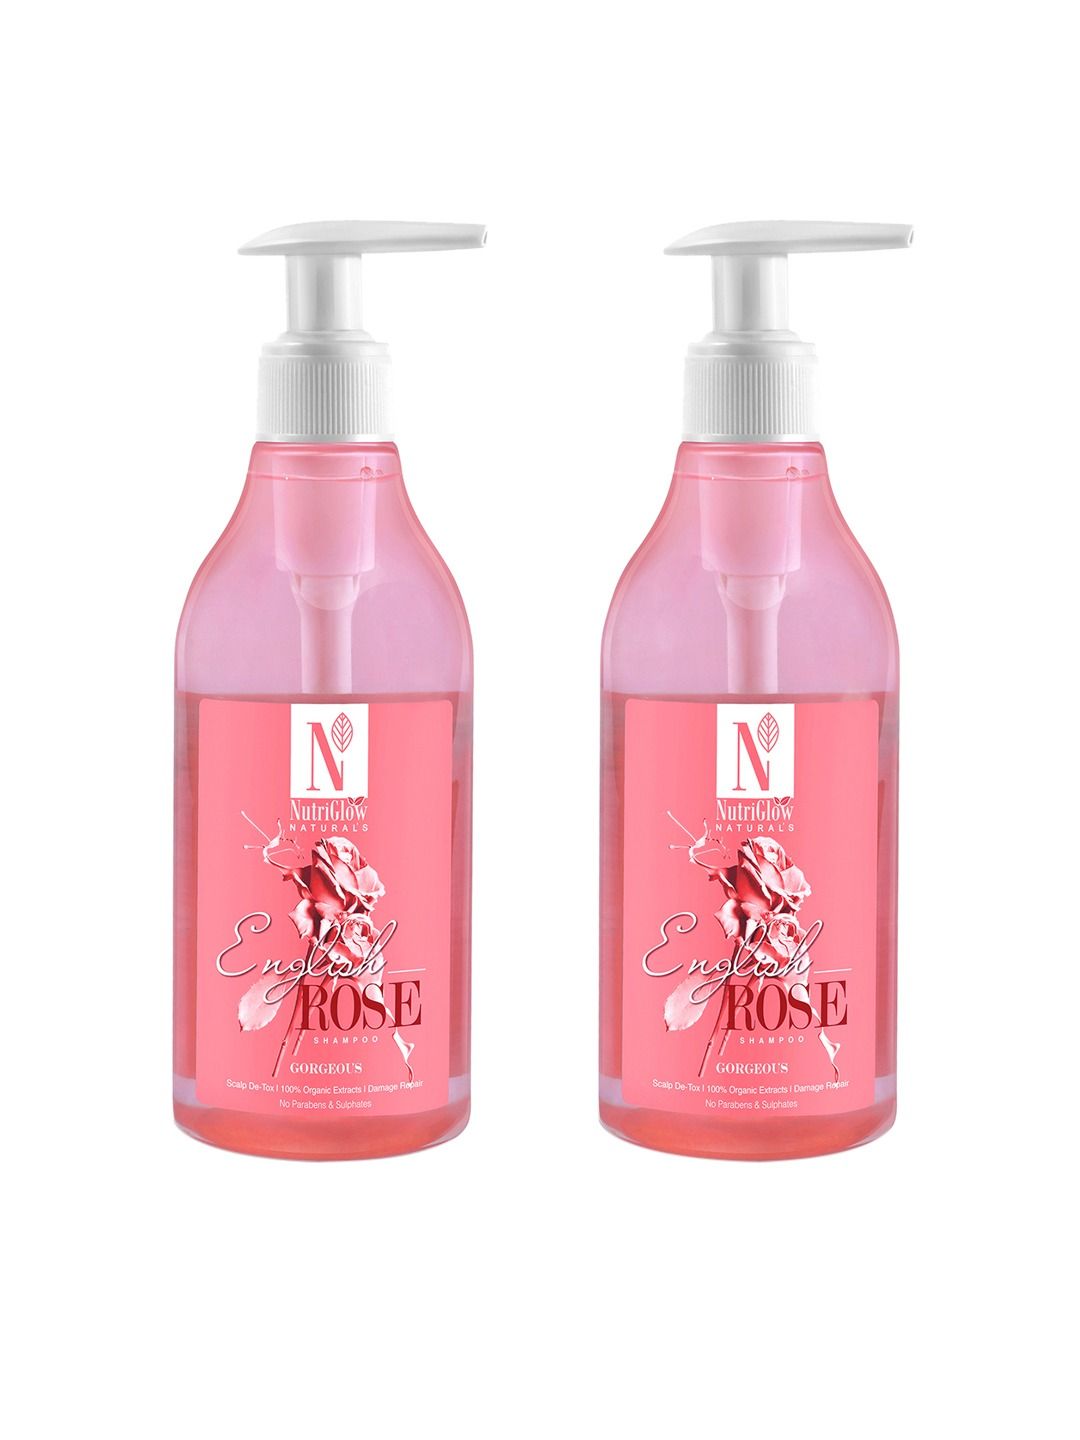 NutriGlow Set of 2 English Rose Shampoo For Control Dandruff, Damaged Hair - 300ml Each Price in India